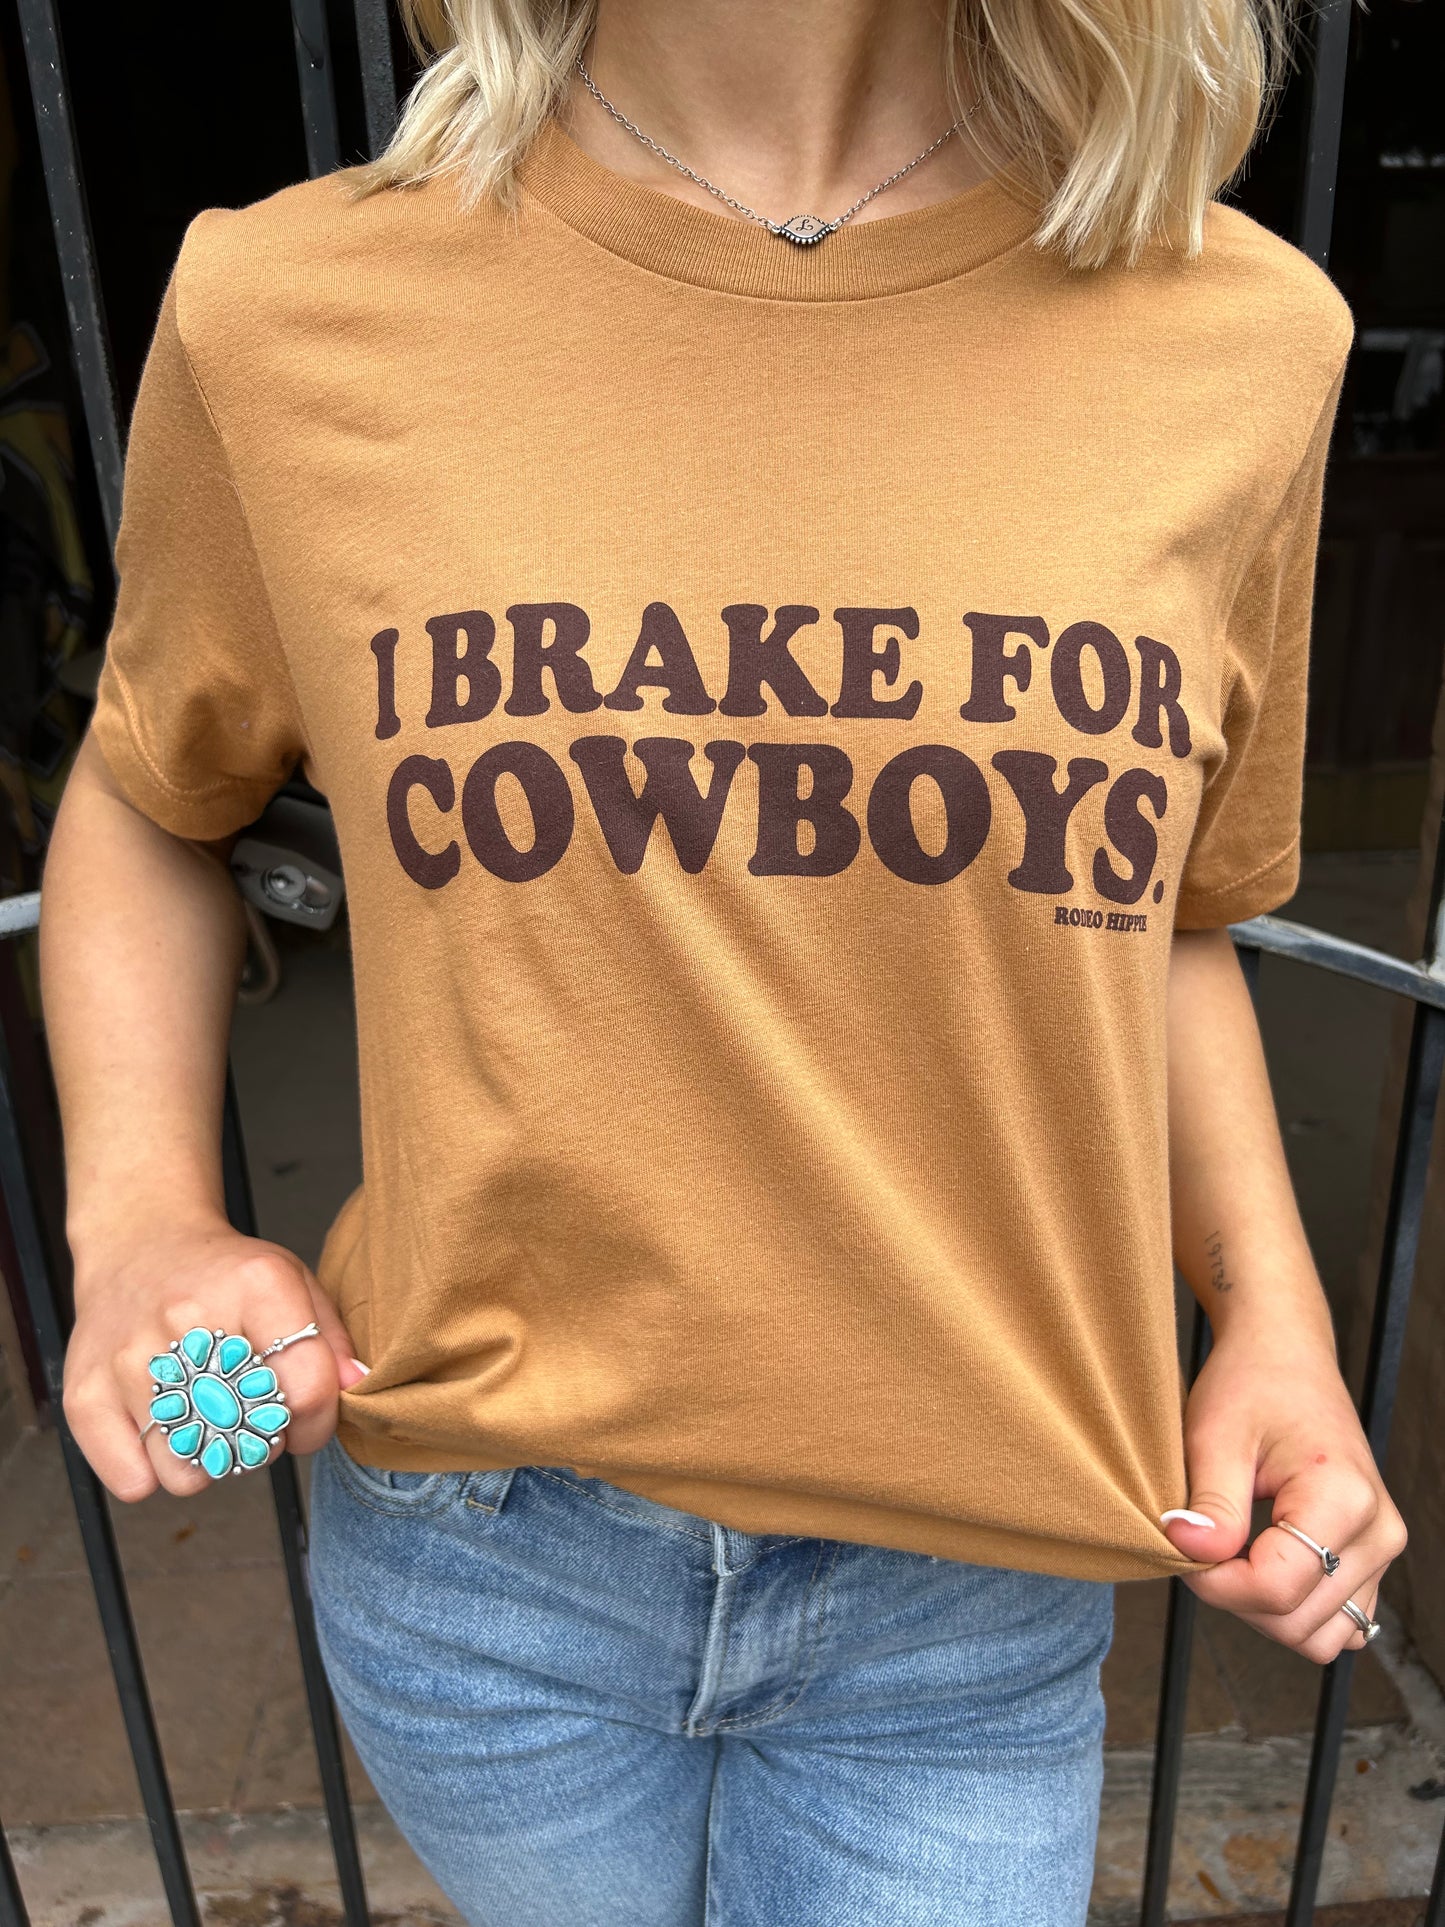 The Brake For Cowboys Tee